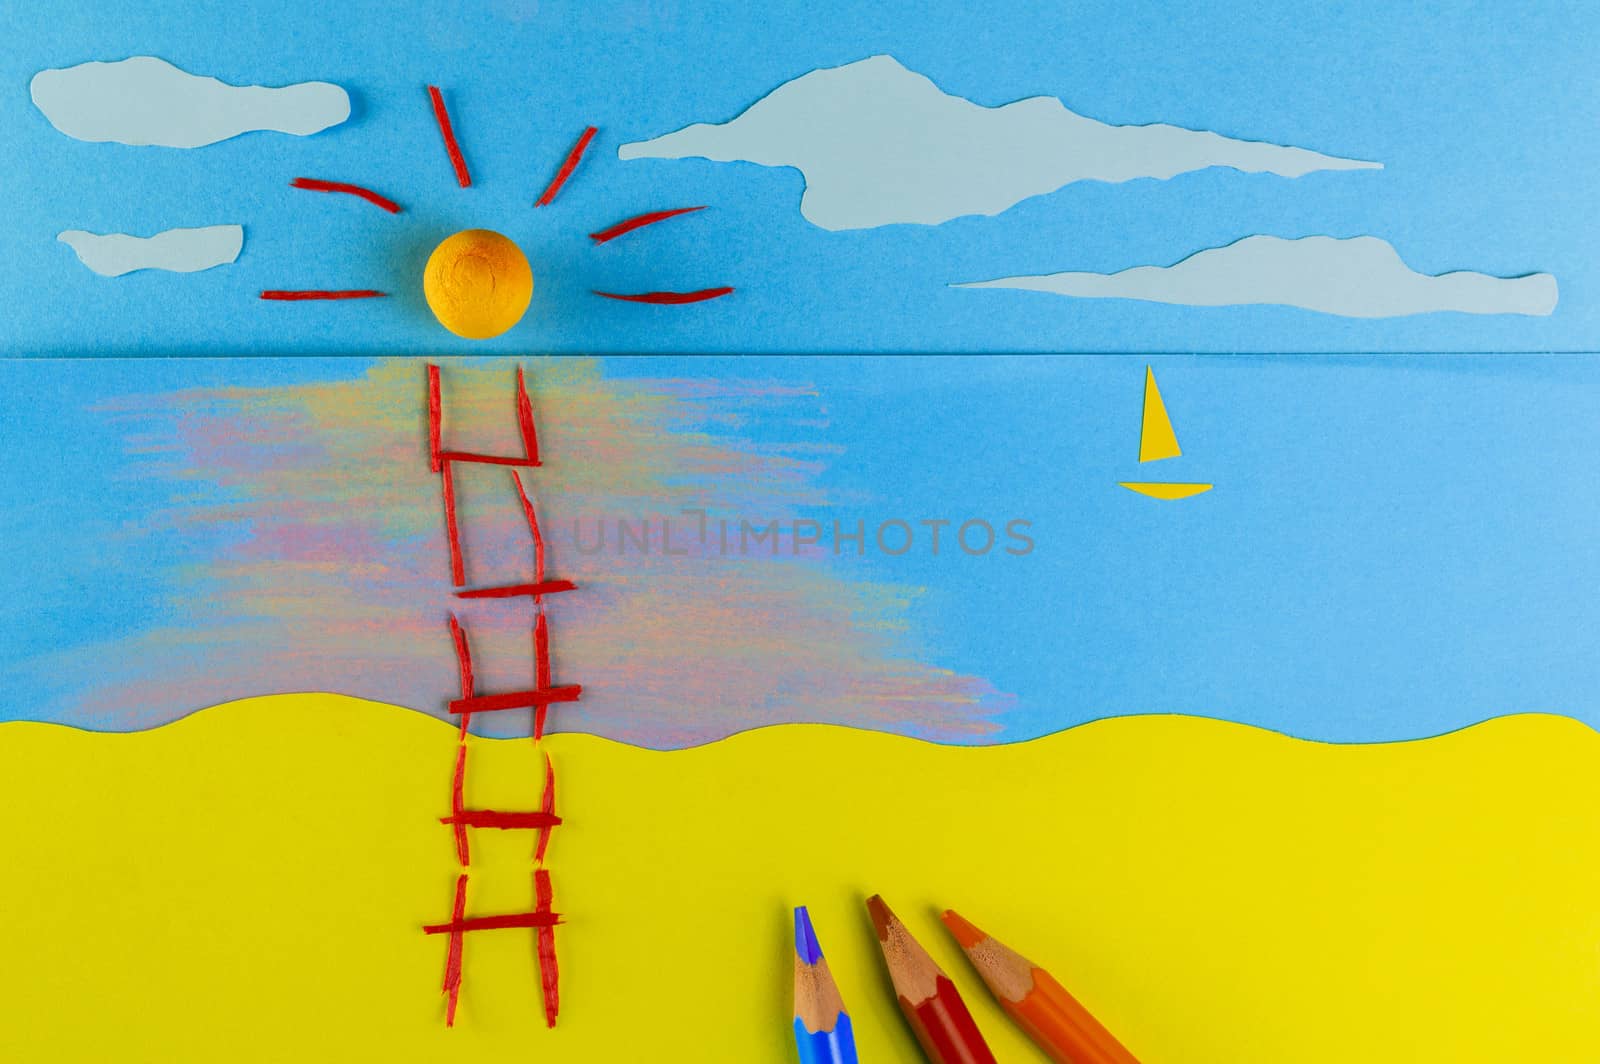 Staircase leading to the sun on a figurative beach on the sunset